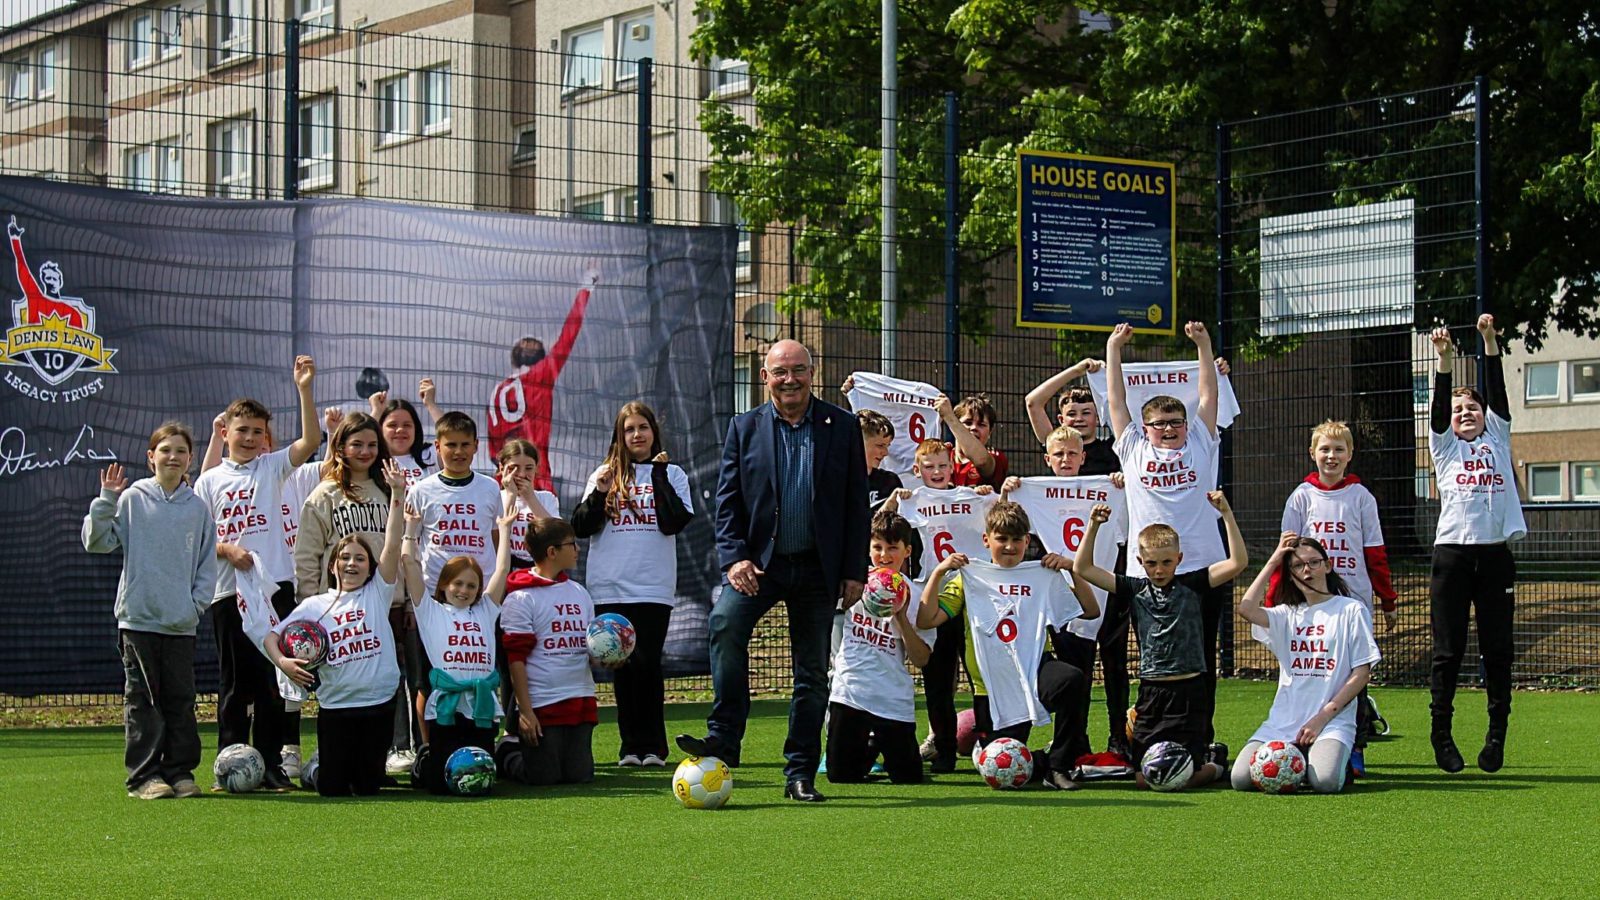 New Cruyff Court officially opened in Tillydrone